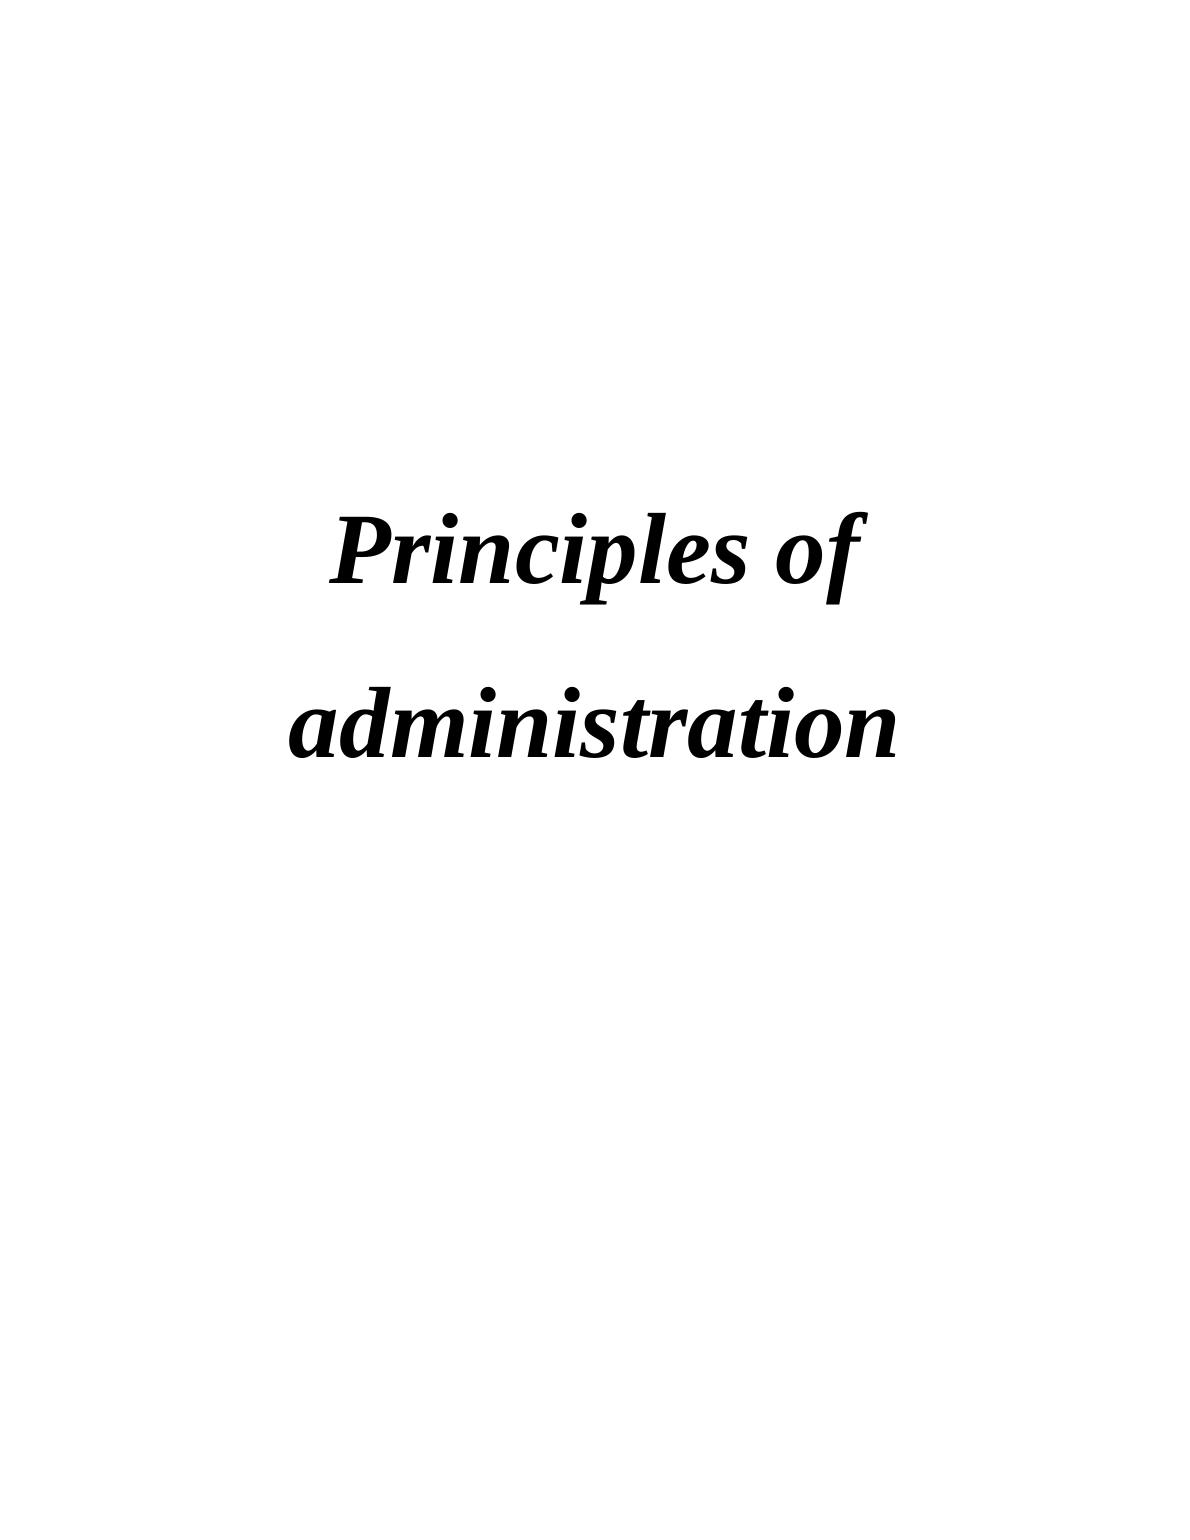 Business Administration Assignment: Principles of Administration_1